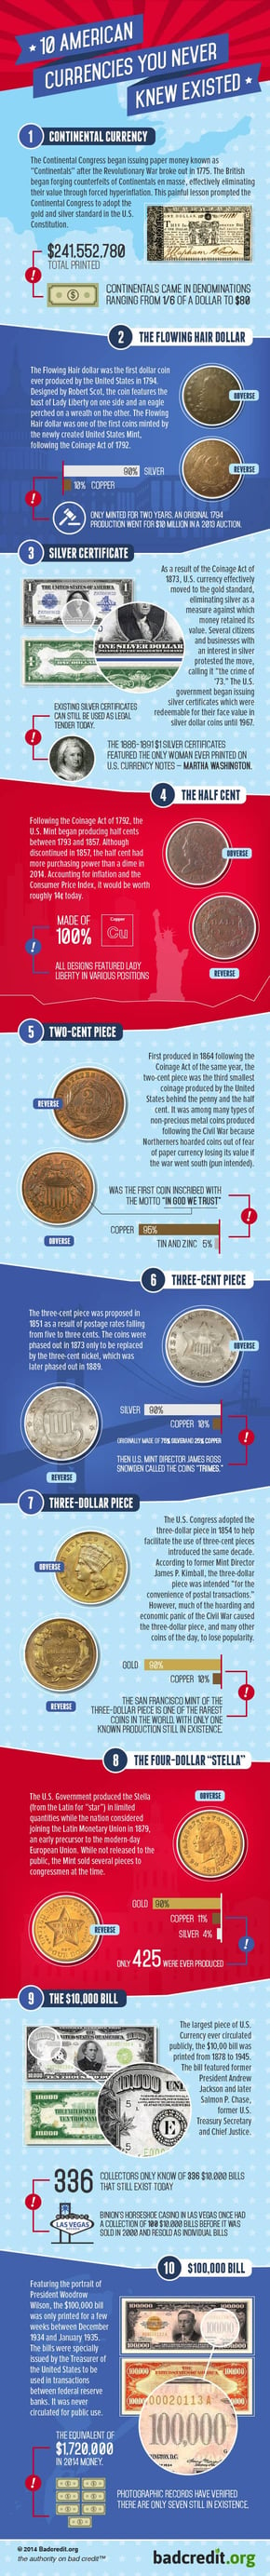 10 American Currencies You Never Knew Existed